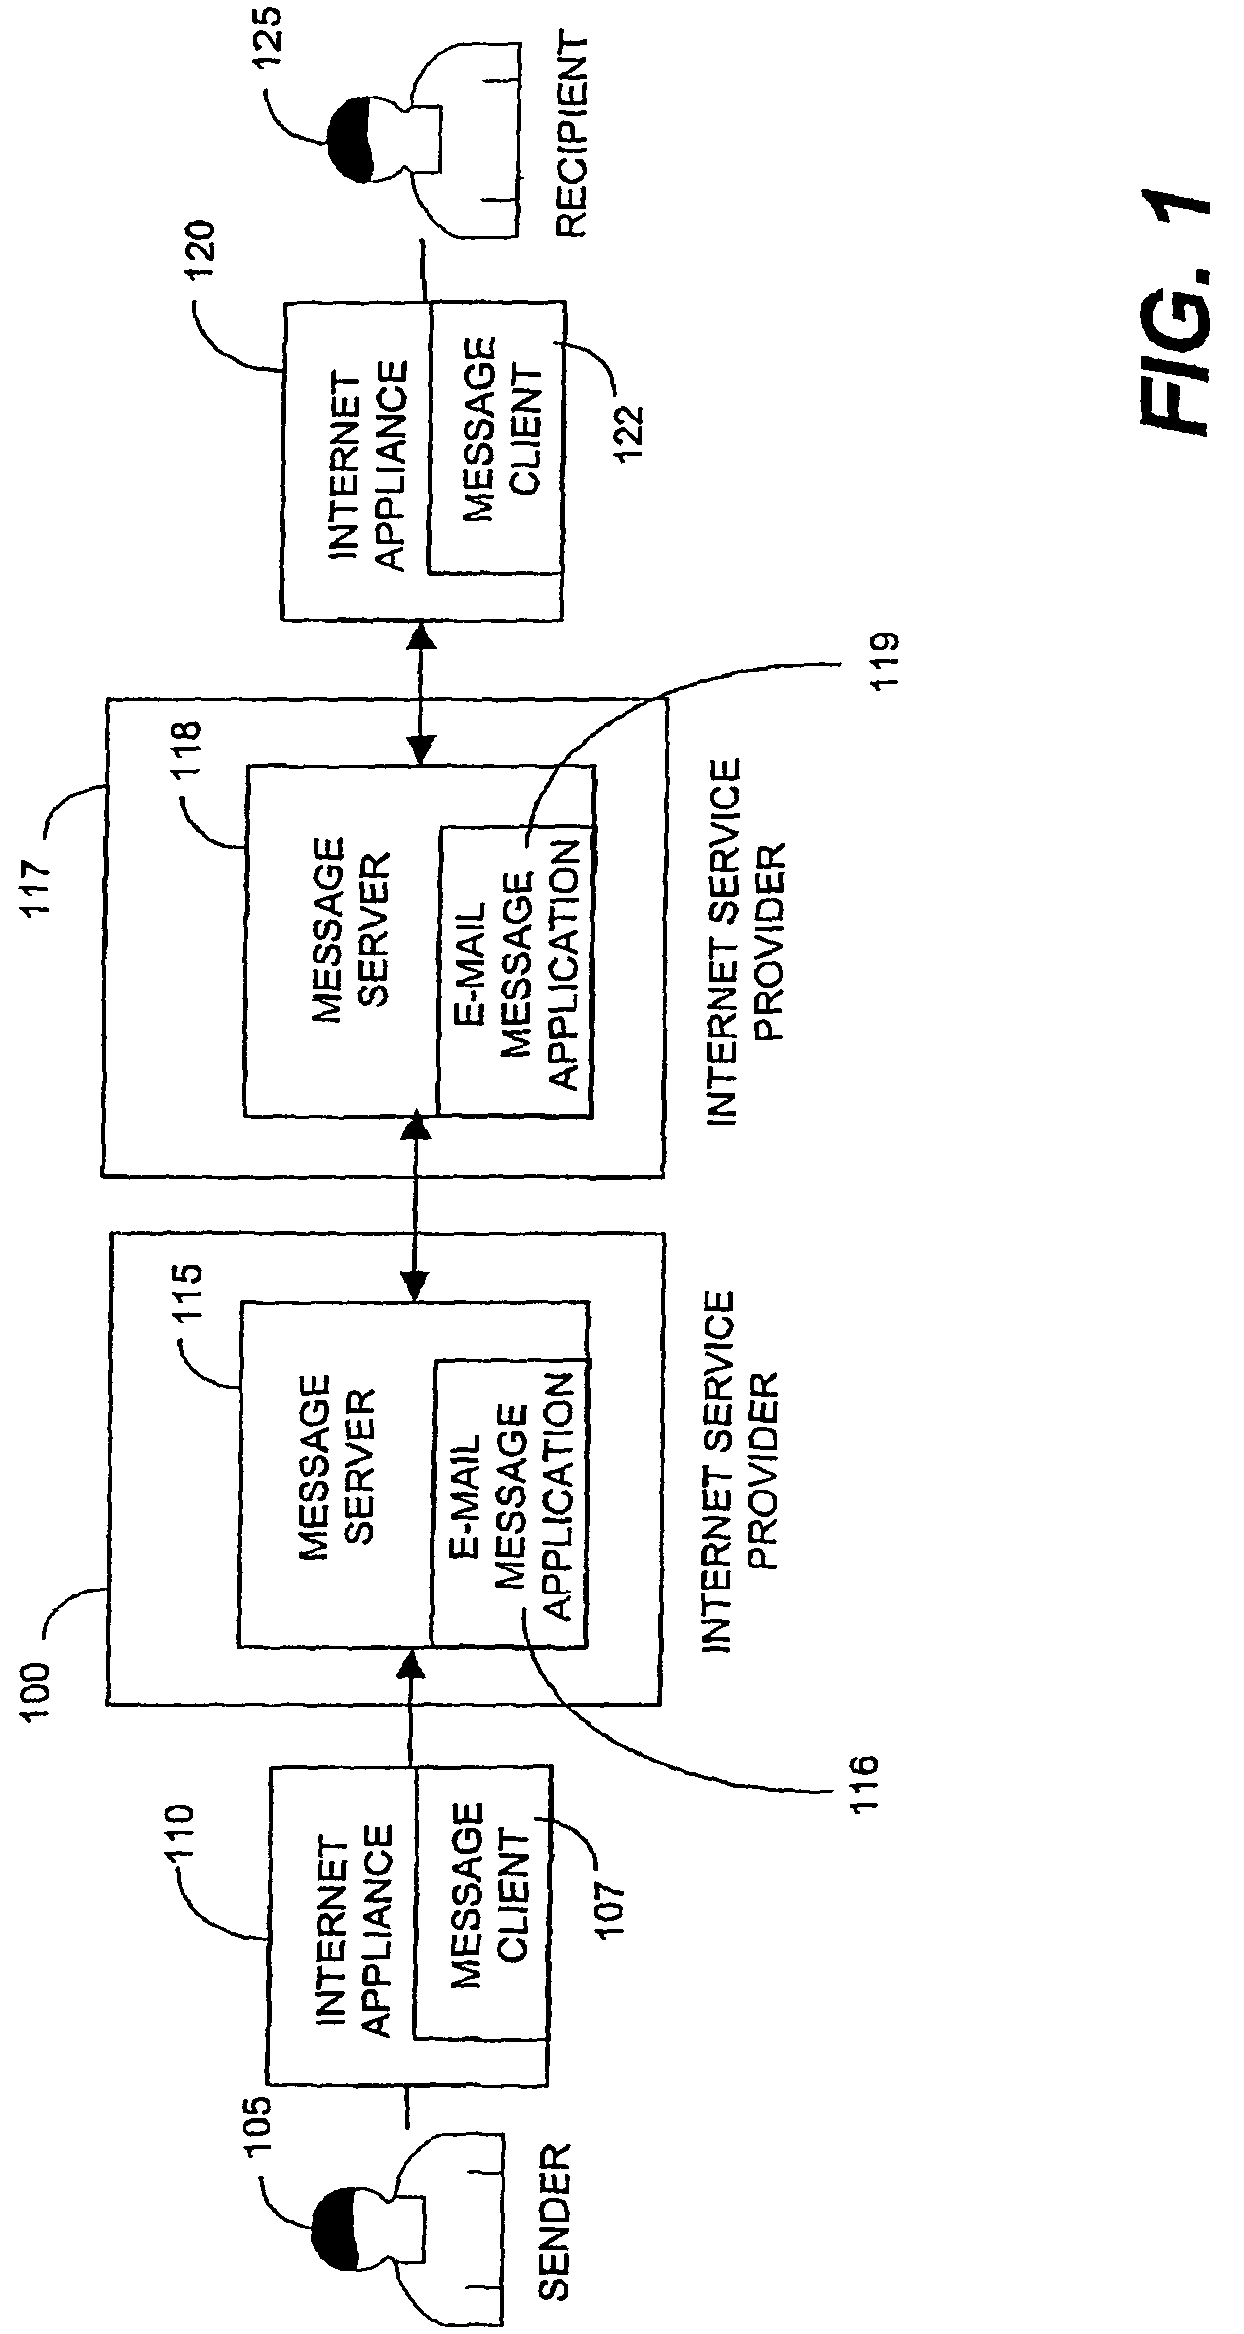 Methods, systems, and computer program products for delivering time-sensitive content